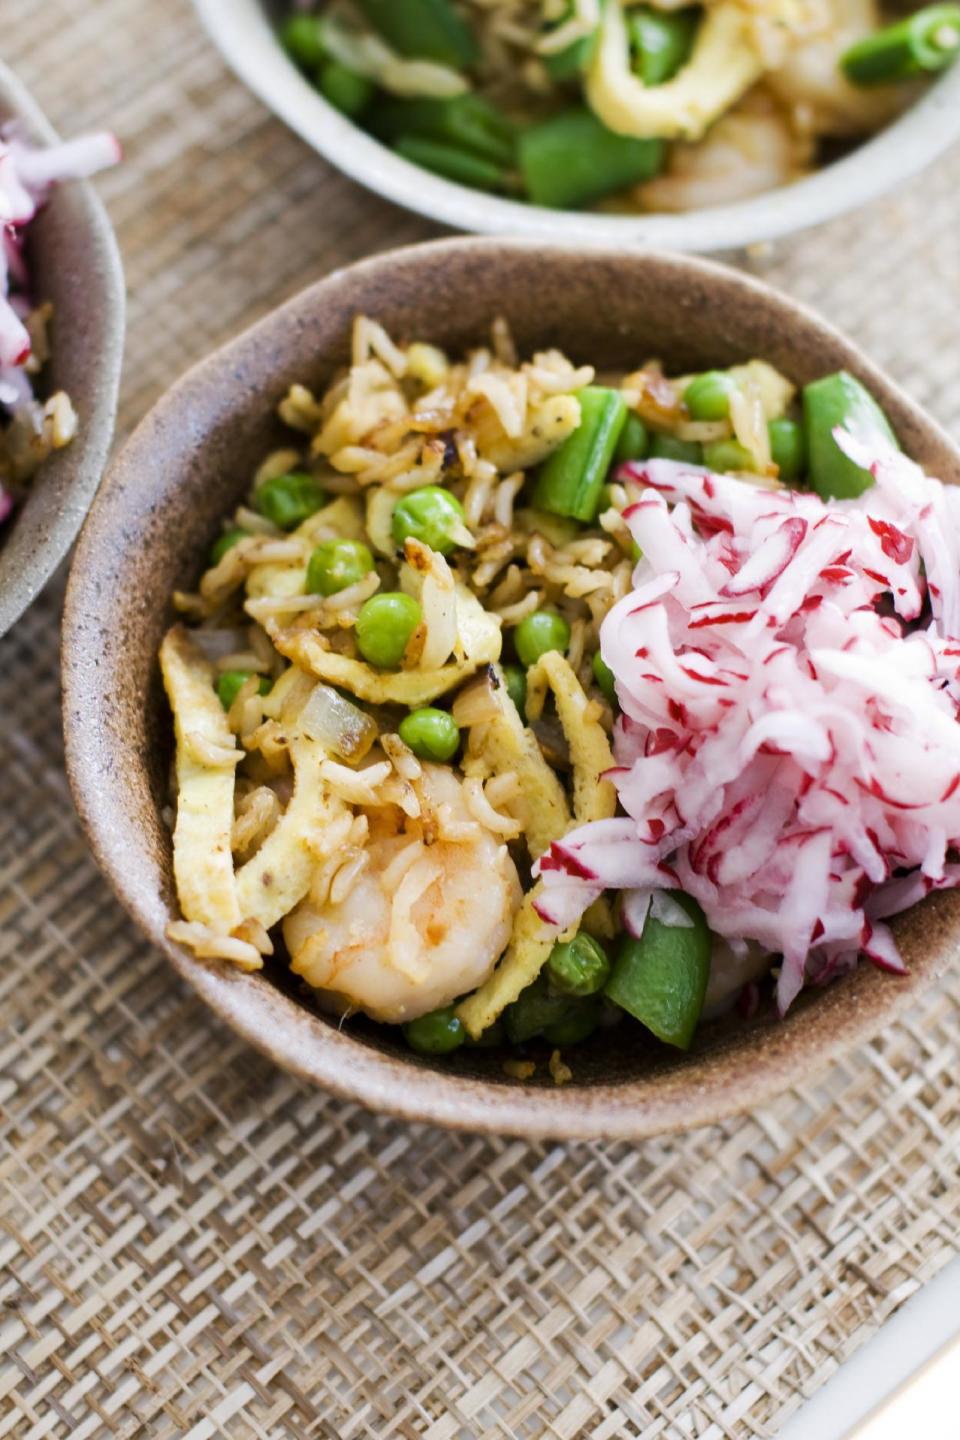 In this image taken on April 8, 2013, shrimp fried rice with pickled radishes is shown served in bowls in Concord, N.H. (AP Photo/Matthew Mead)